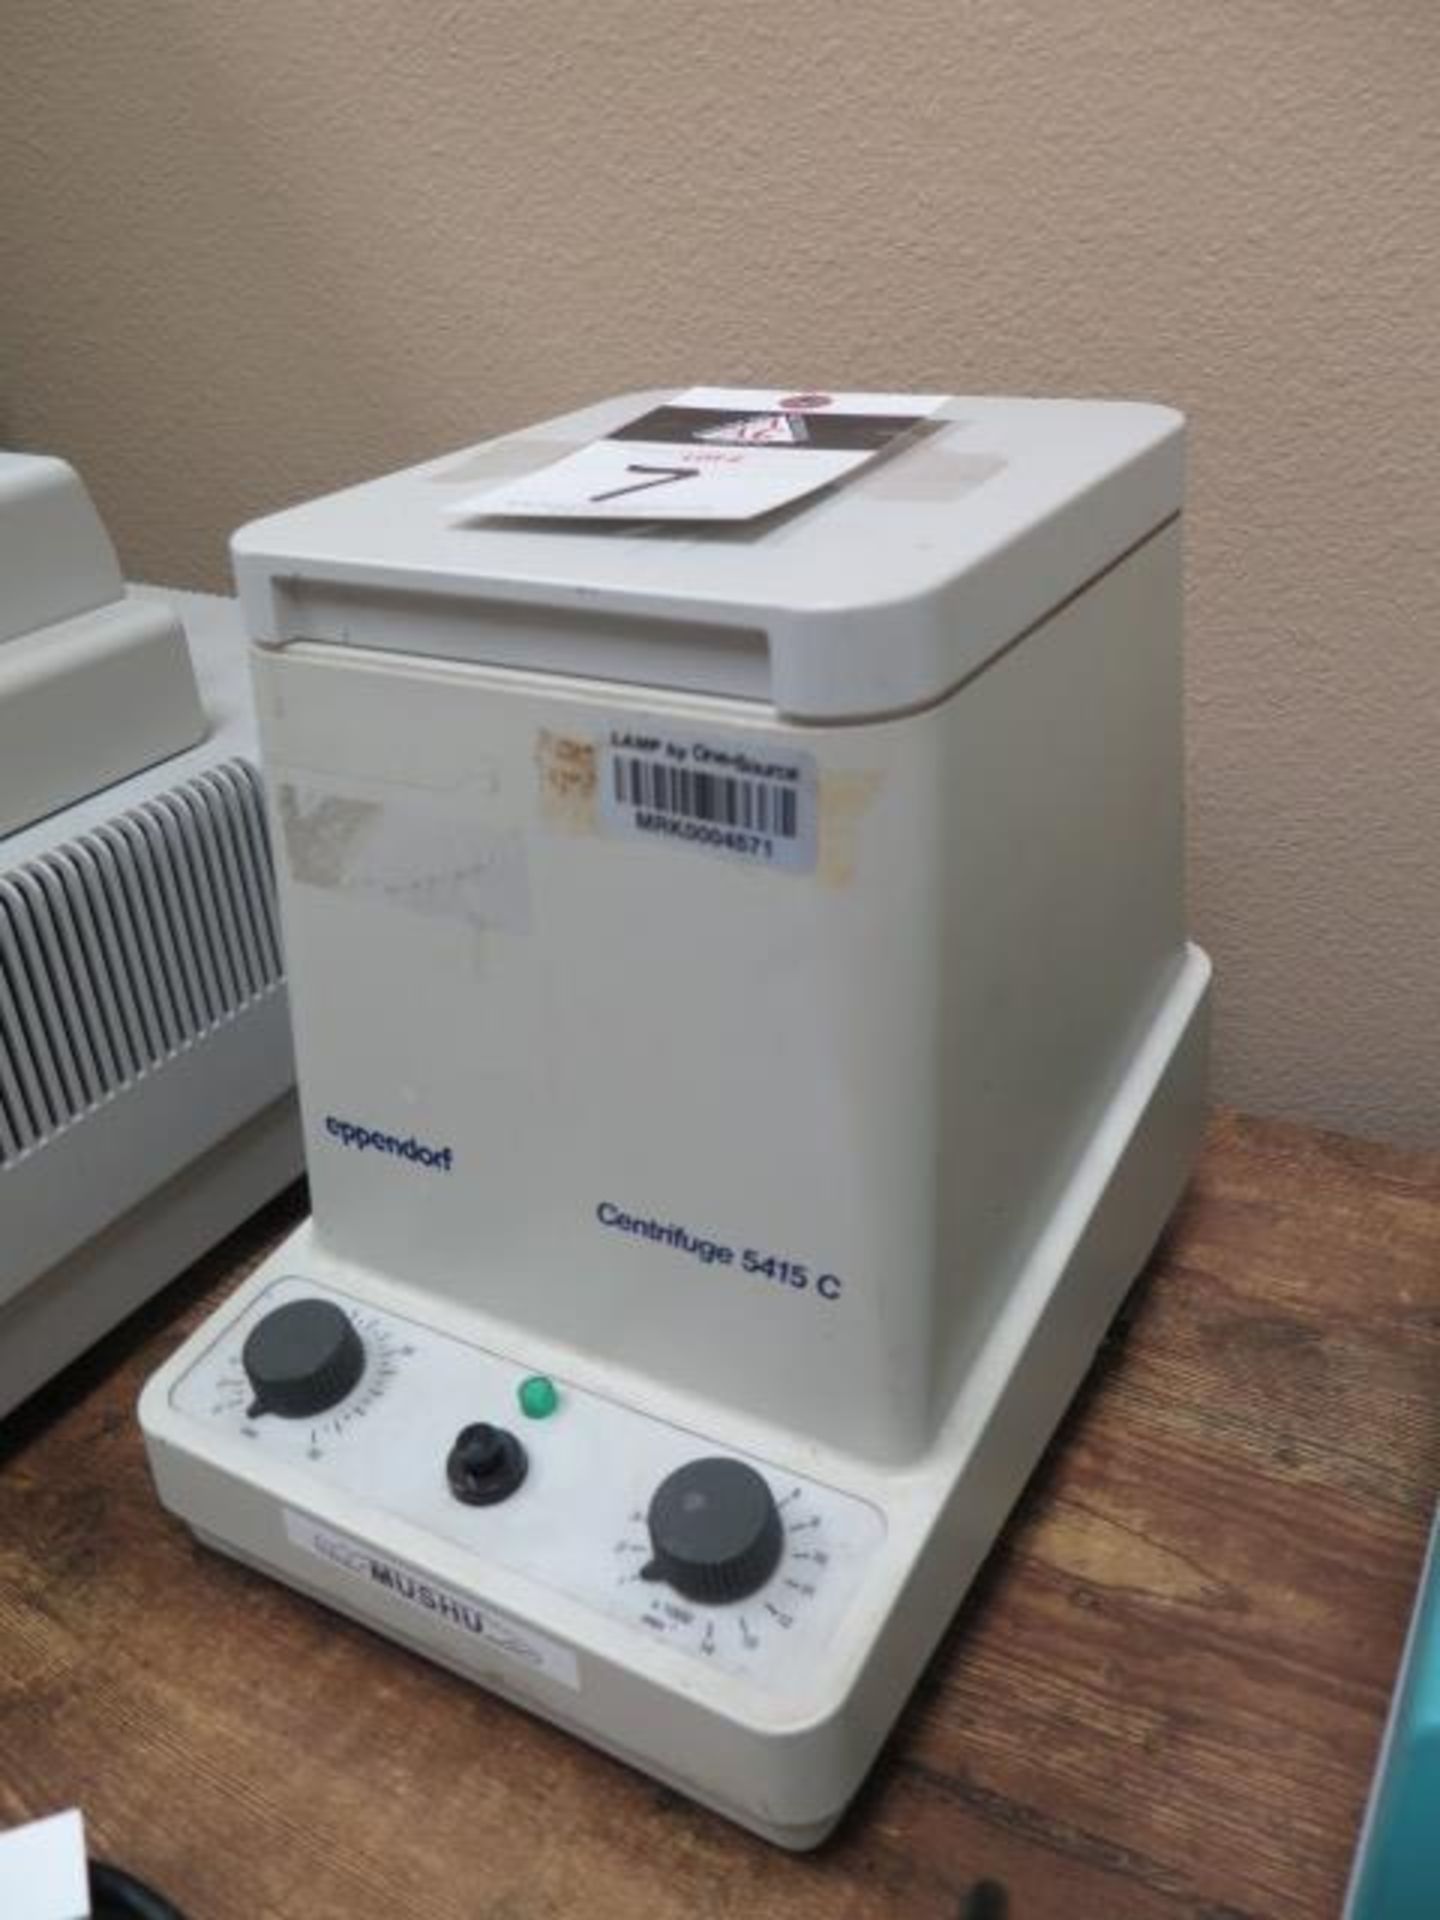 Eppendorf 5415C Centrifuge (SOLD AS-IS - NO WARRANTY) - Image 2 of 6